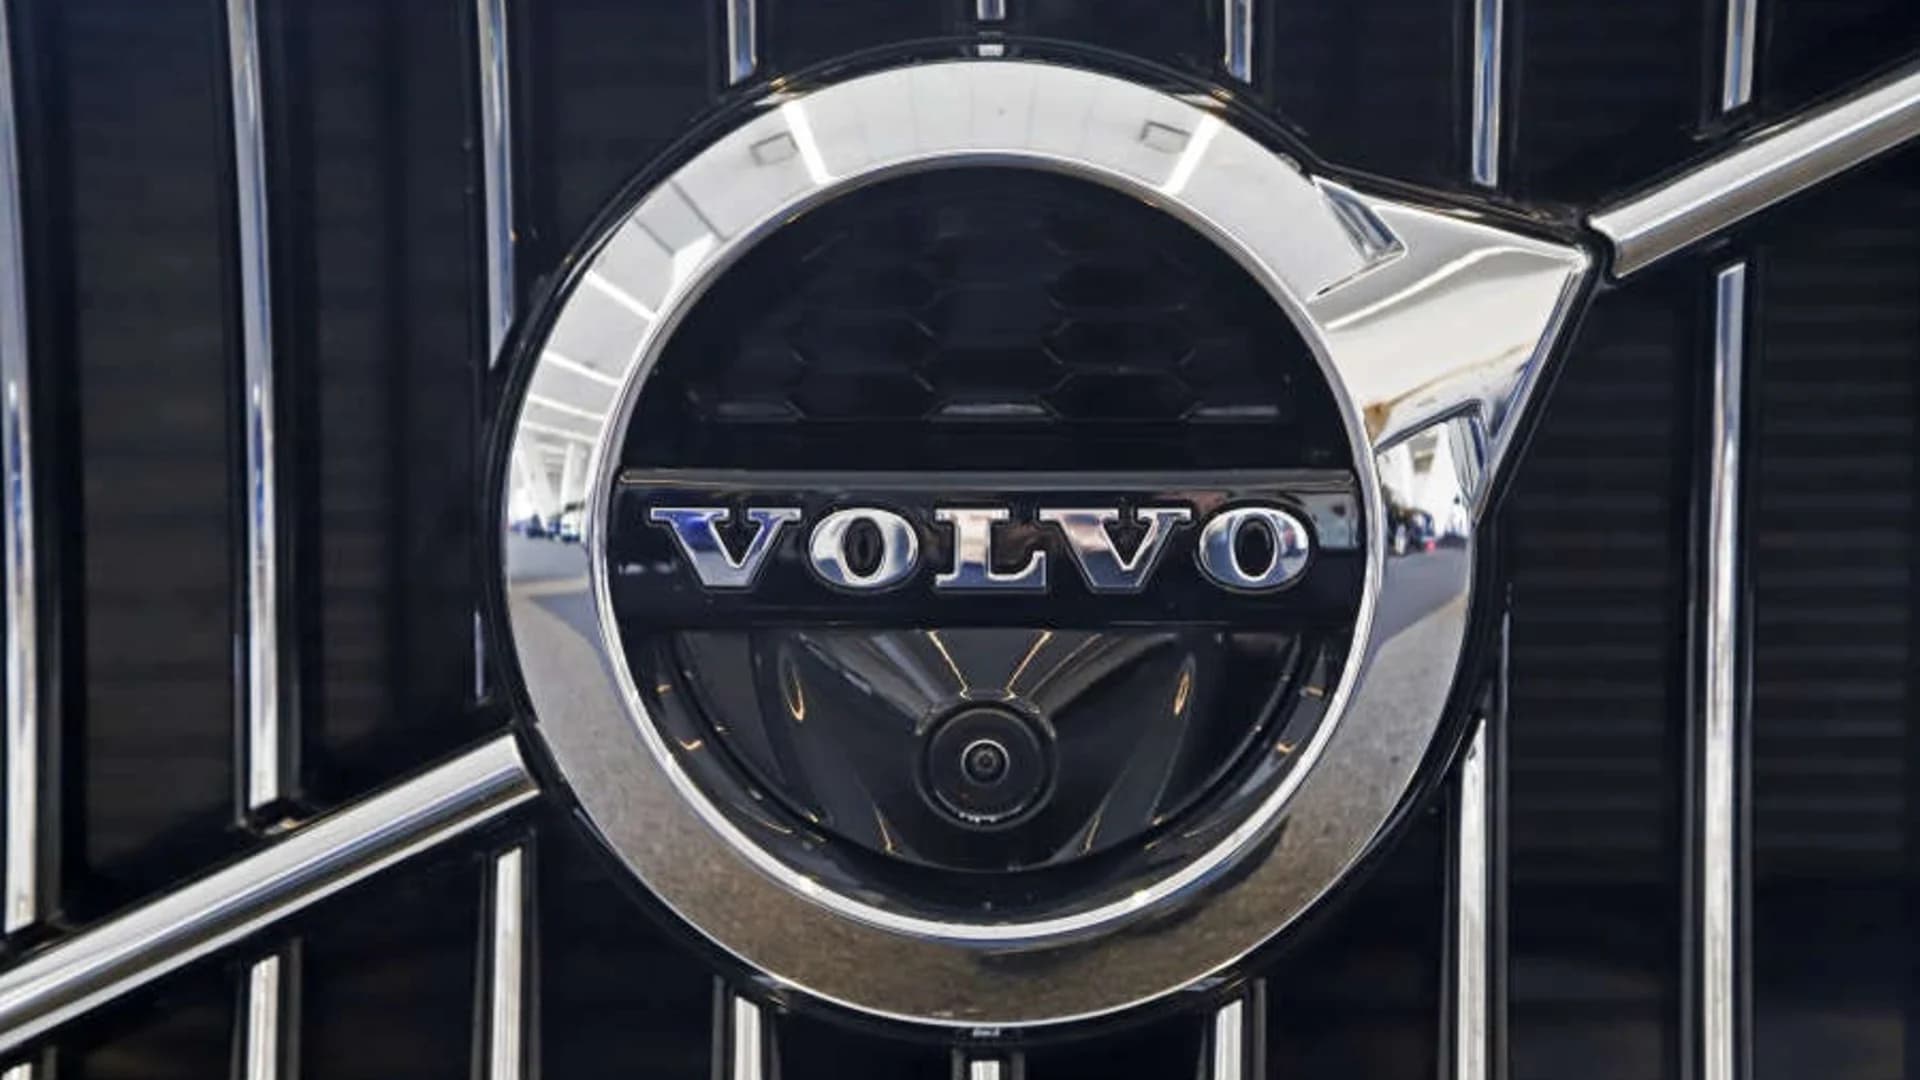 Volvo recalls about 500,000 vehicles due faulty engine part